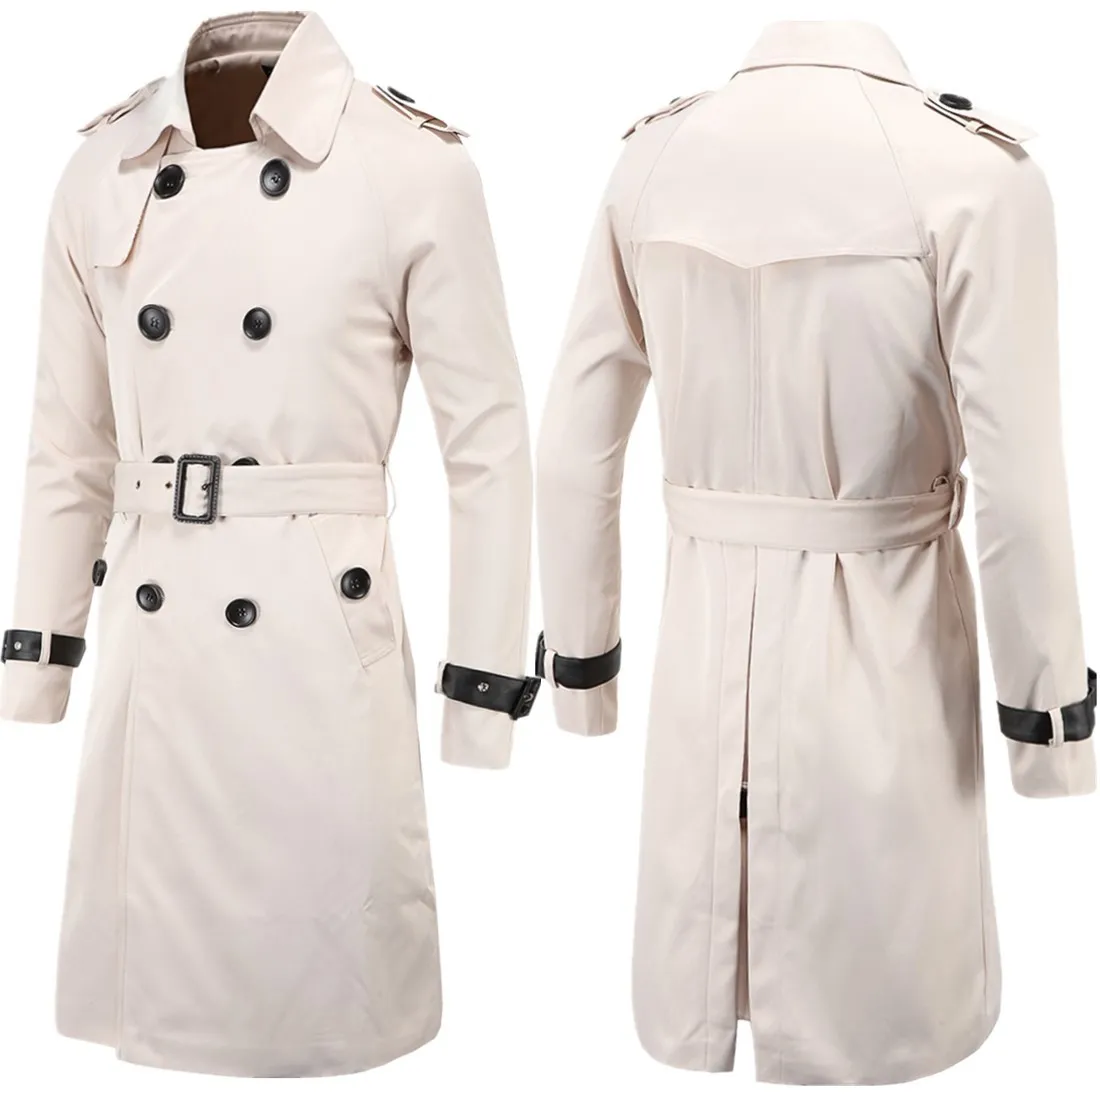 Men's Trench Coats High-end Clothing Spring&Autumn Long Overcoat Double Breasted Coat Cotton Blend D0nynaass19